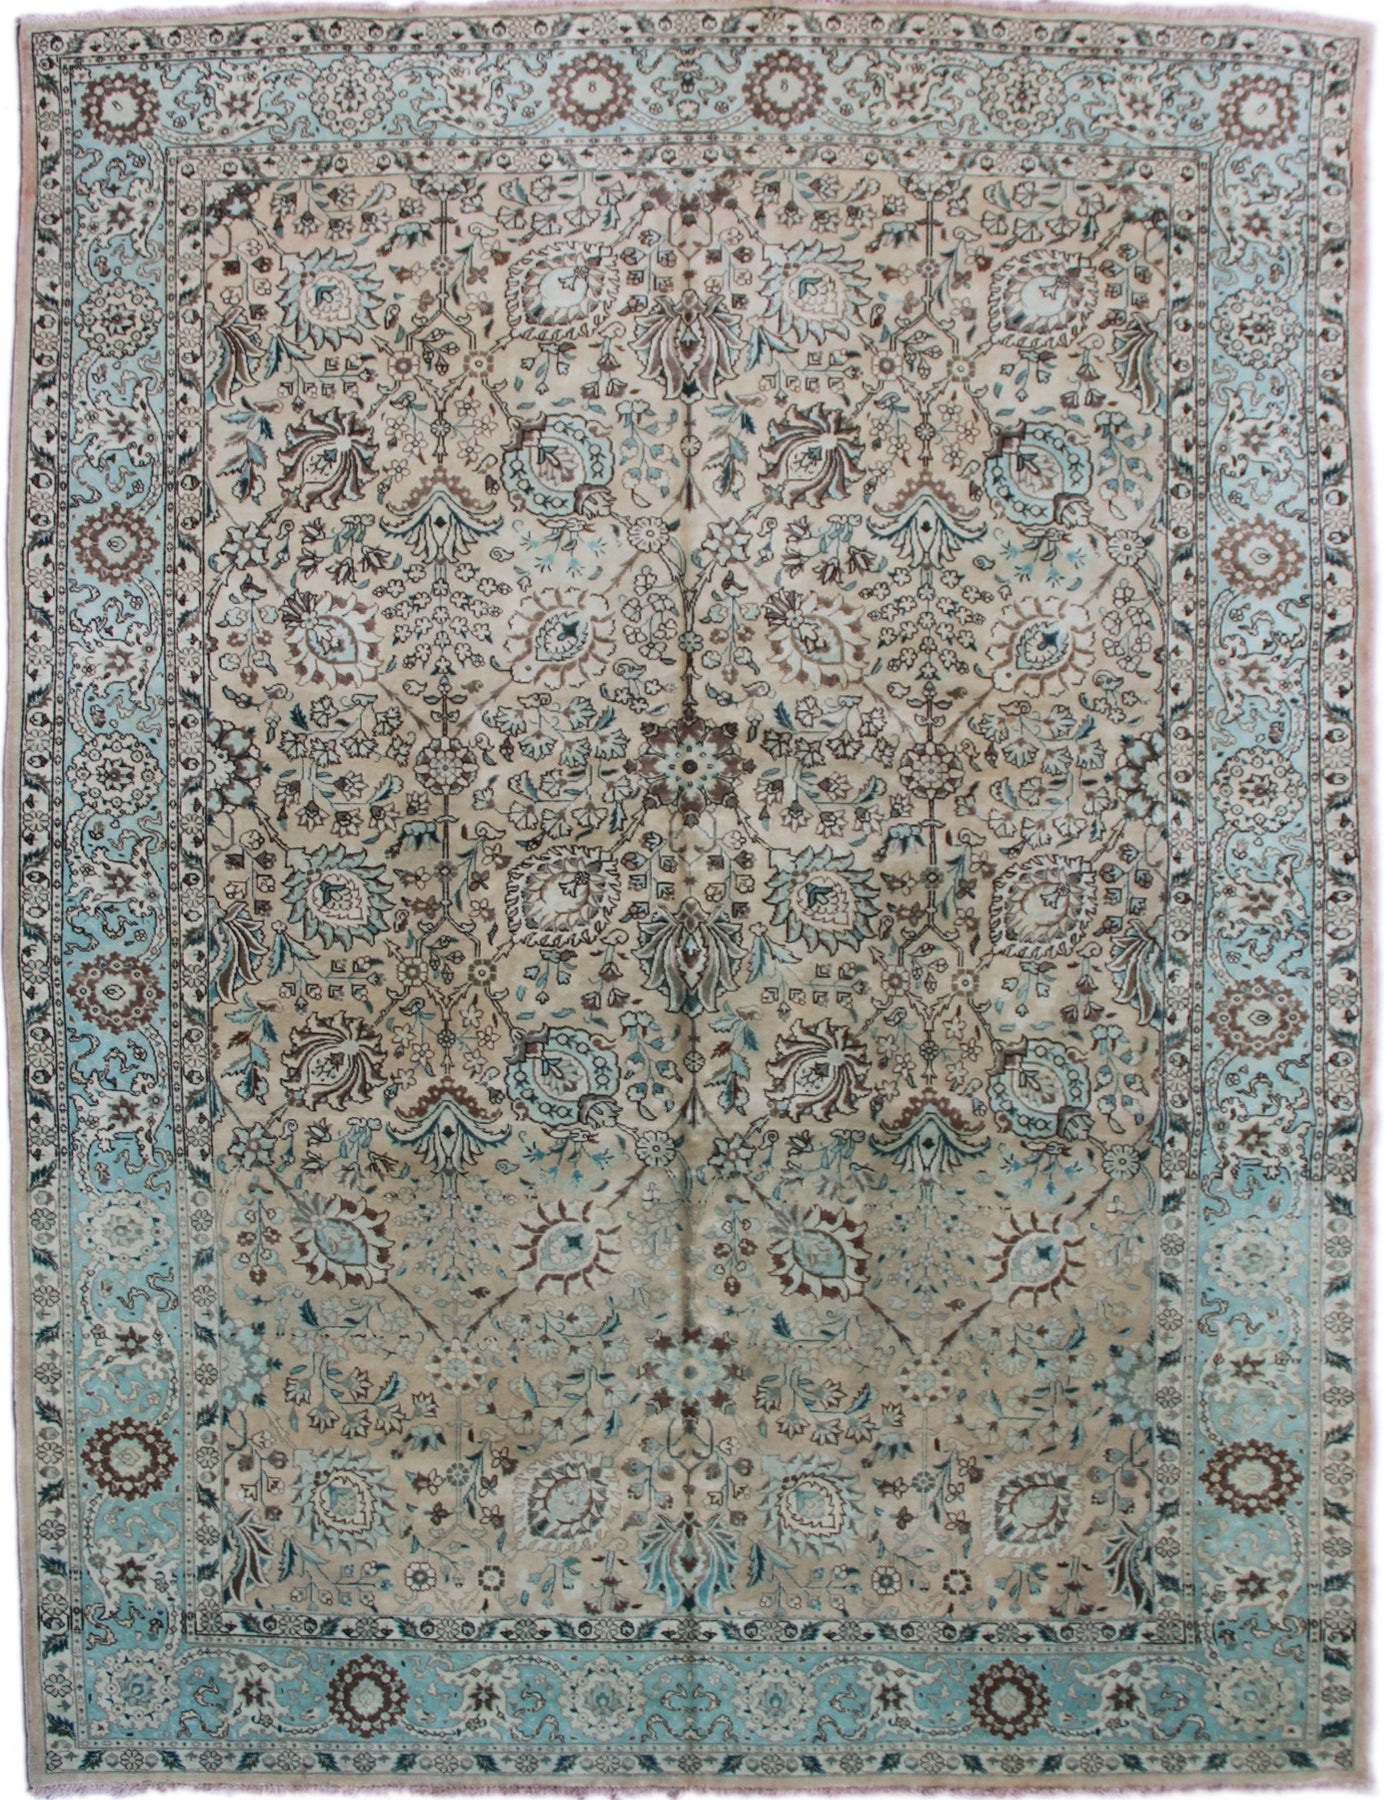 10x13 Blue and Apricot Shahabass Design Persian Tabriz Rug